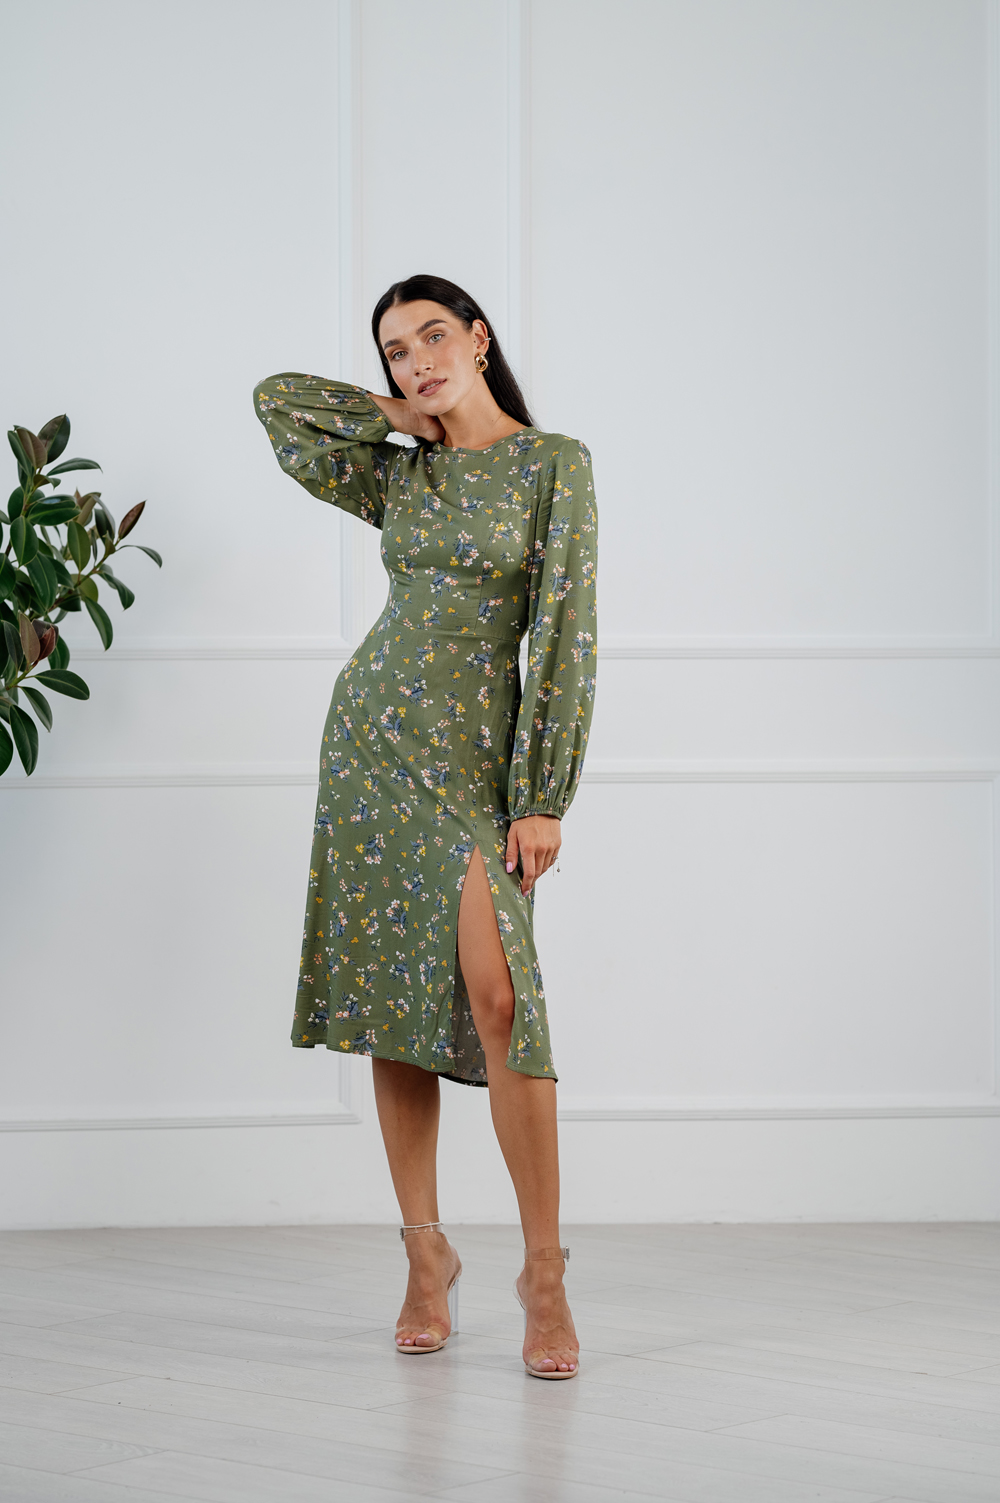 Slim fit midi dress in avocado shade and casual style